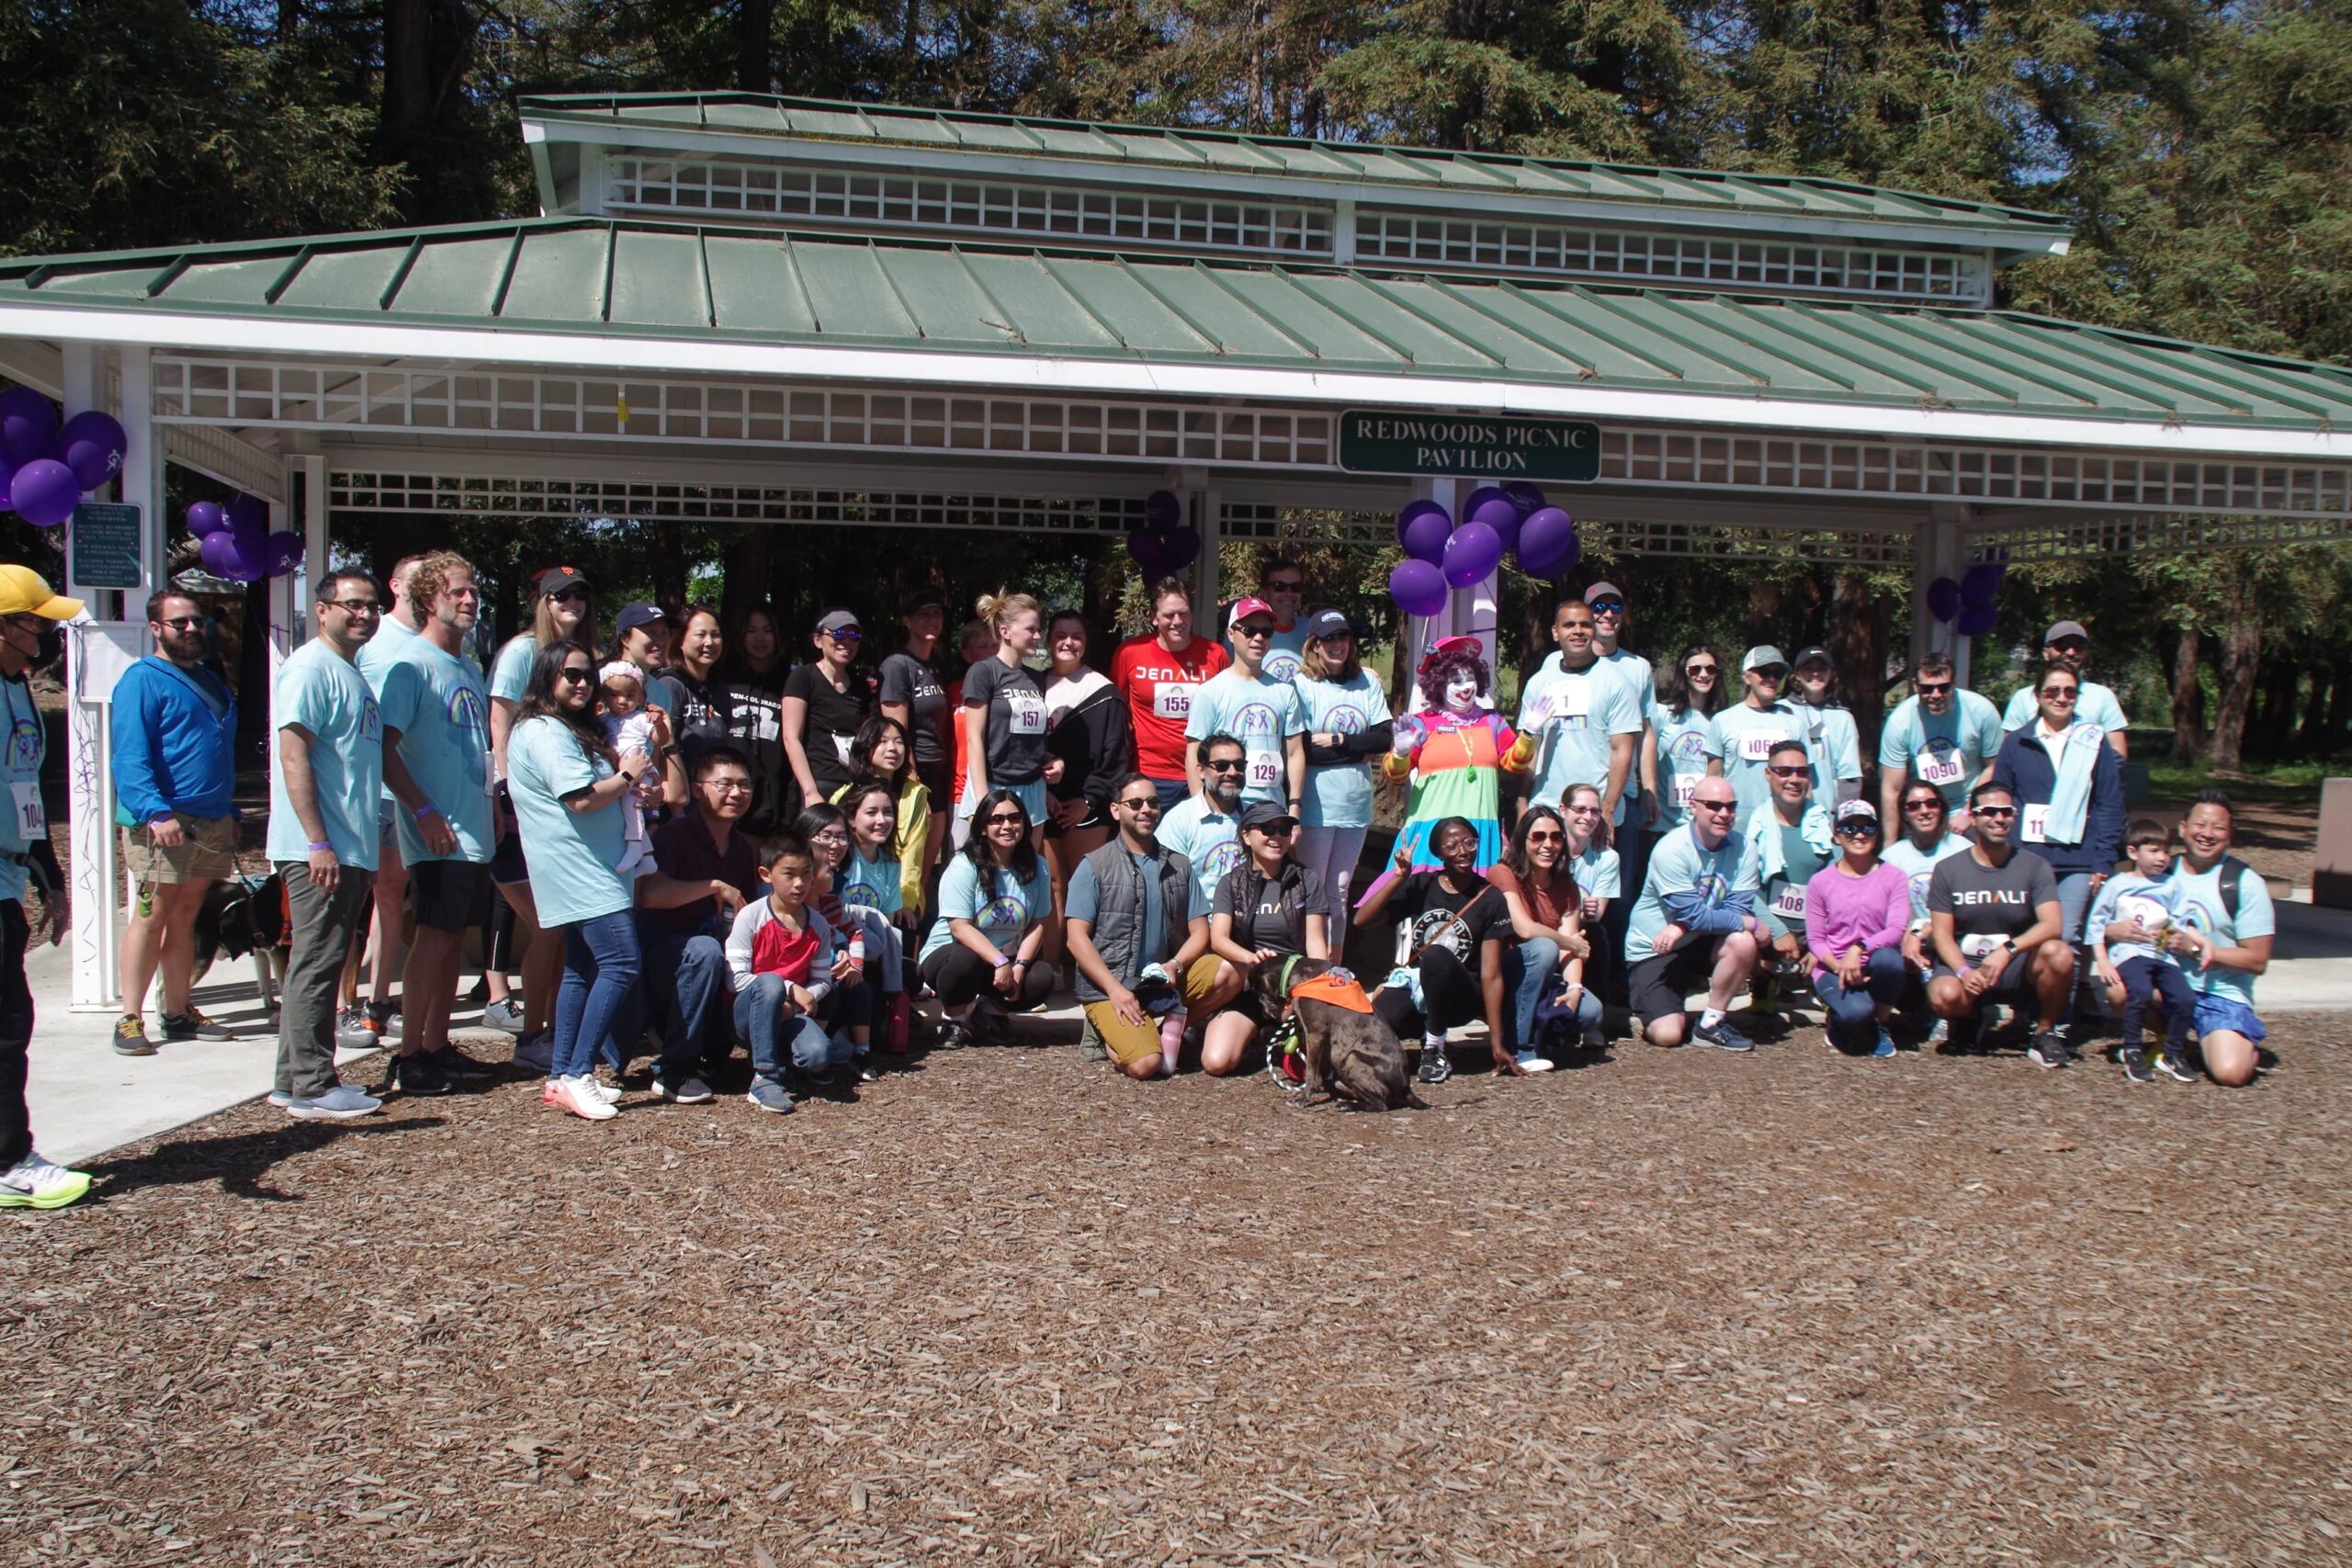 Group gathers at a gazebo for a group photo after the Napa Race for a Cure event